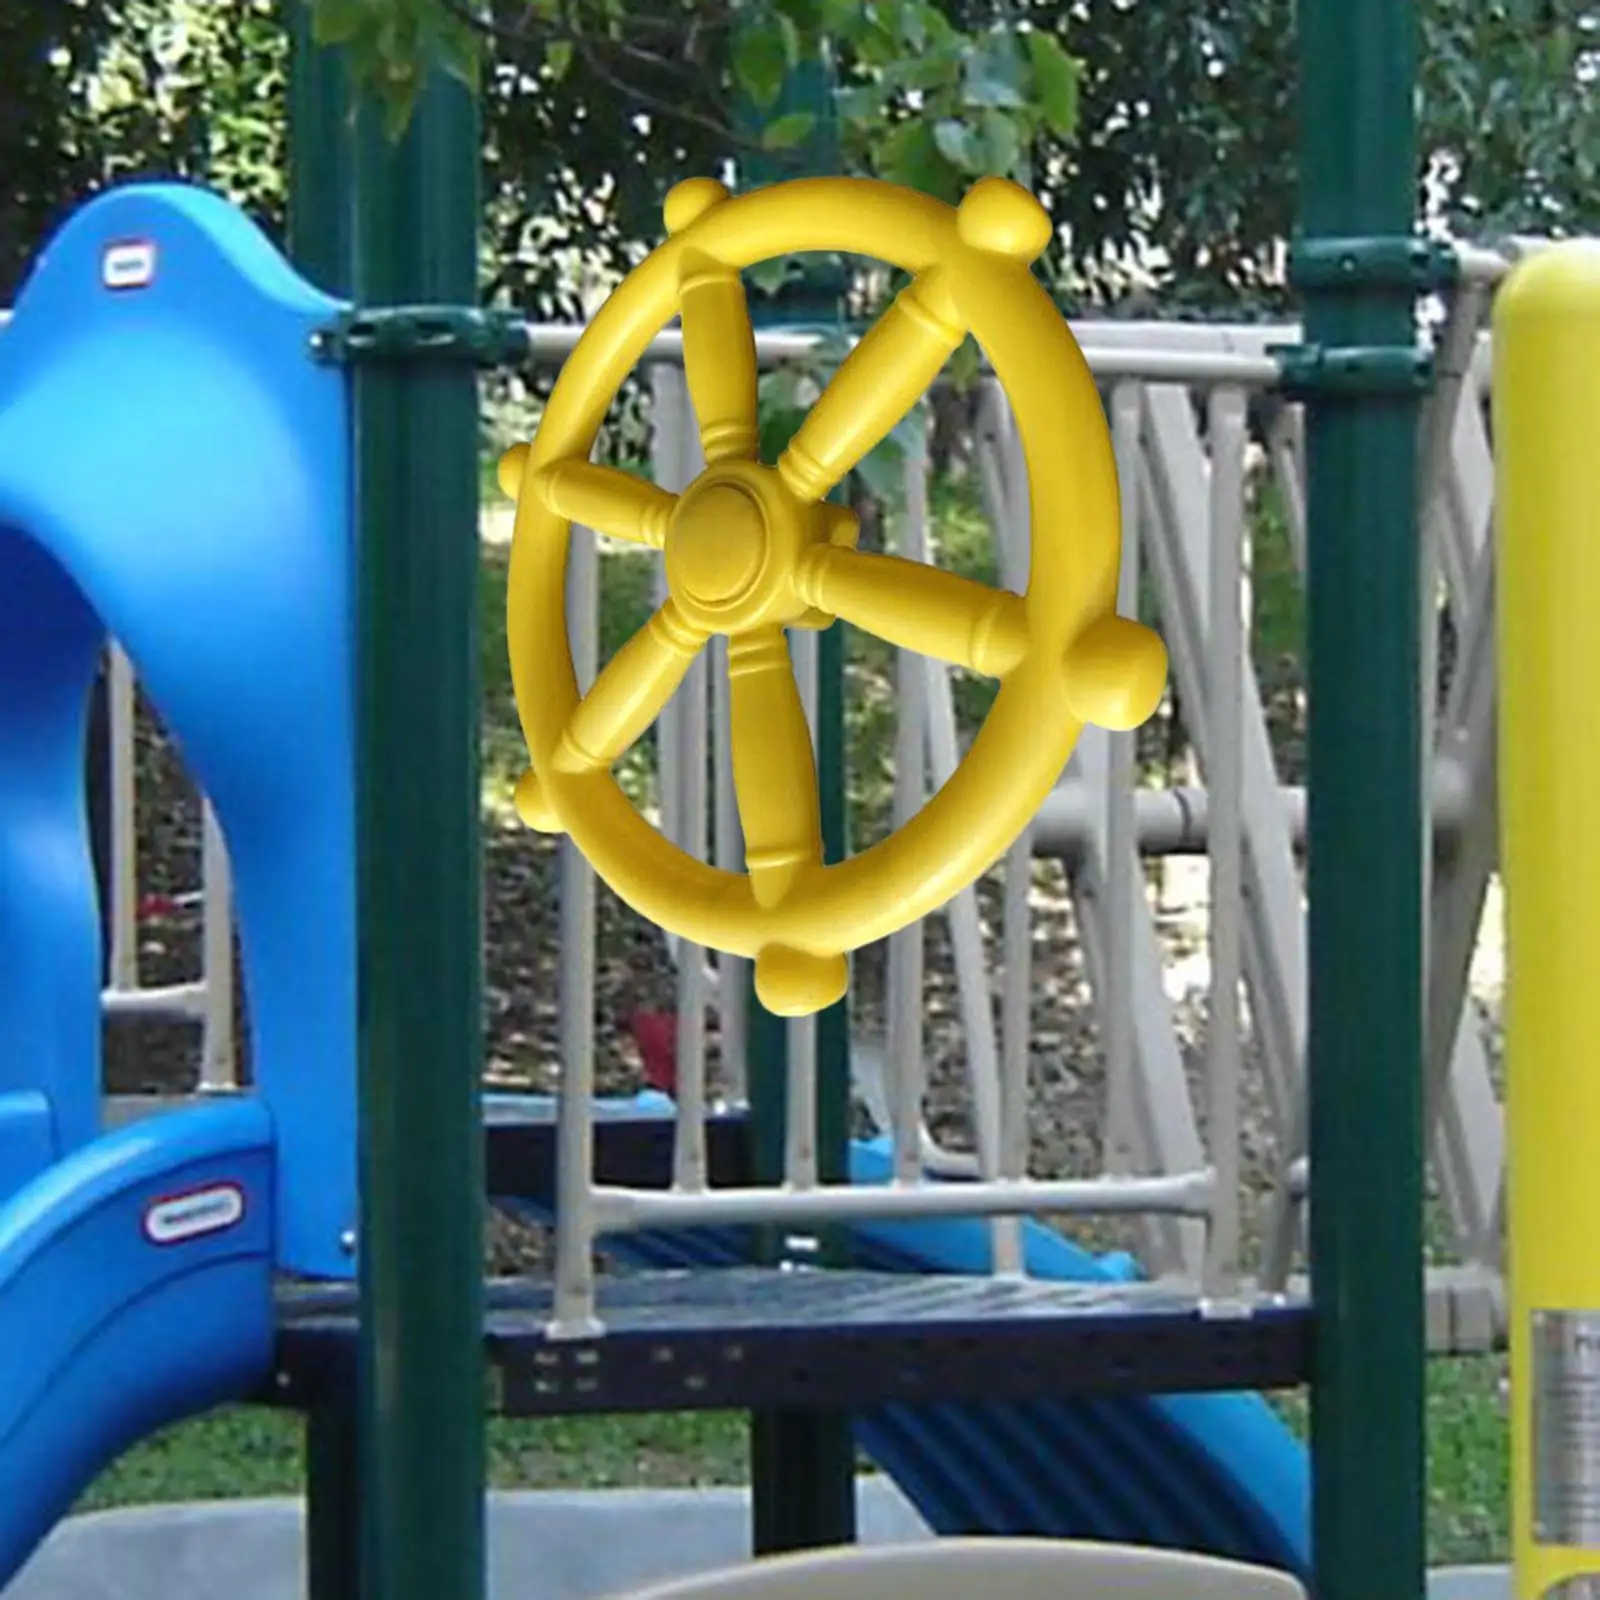 Pirate Ship Wheel Climb Jungle Gym Steering Wheel Playground Equipment for Park Amusement Park Outdoor Playhouse Treehouse